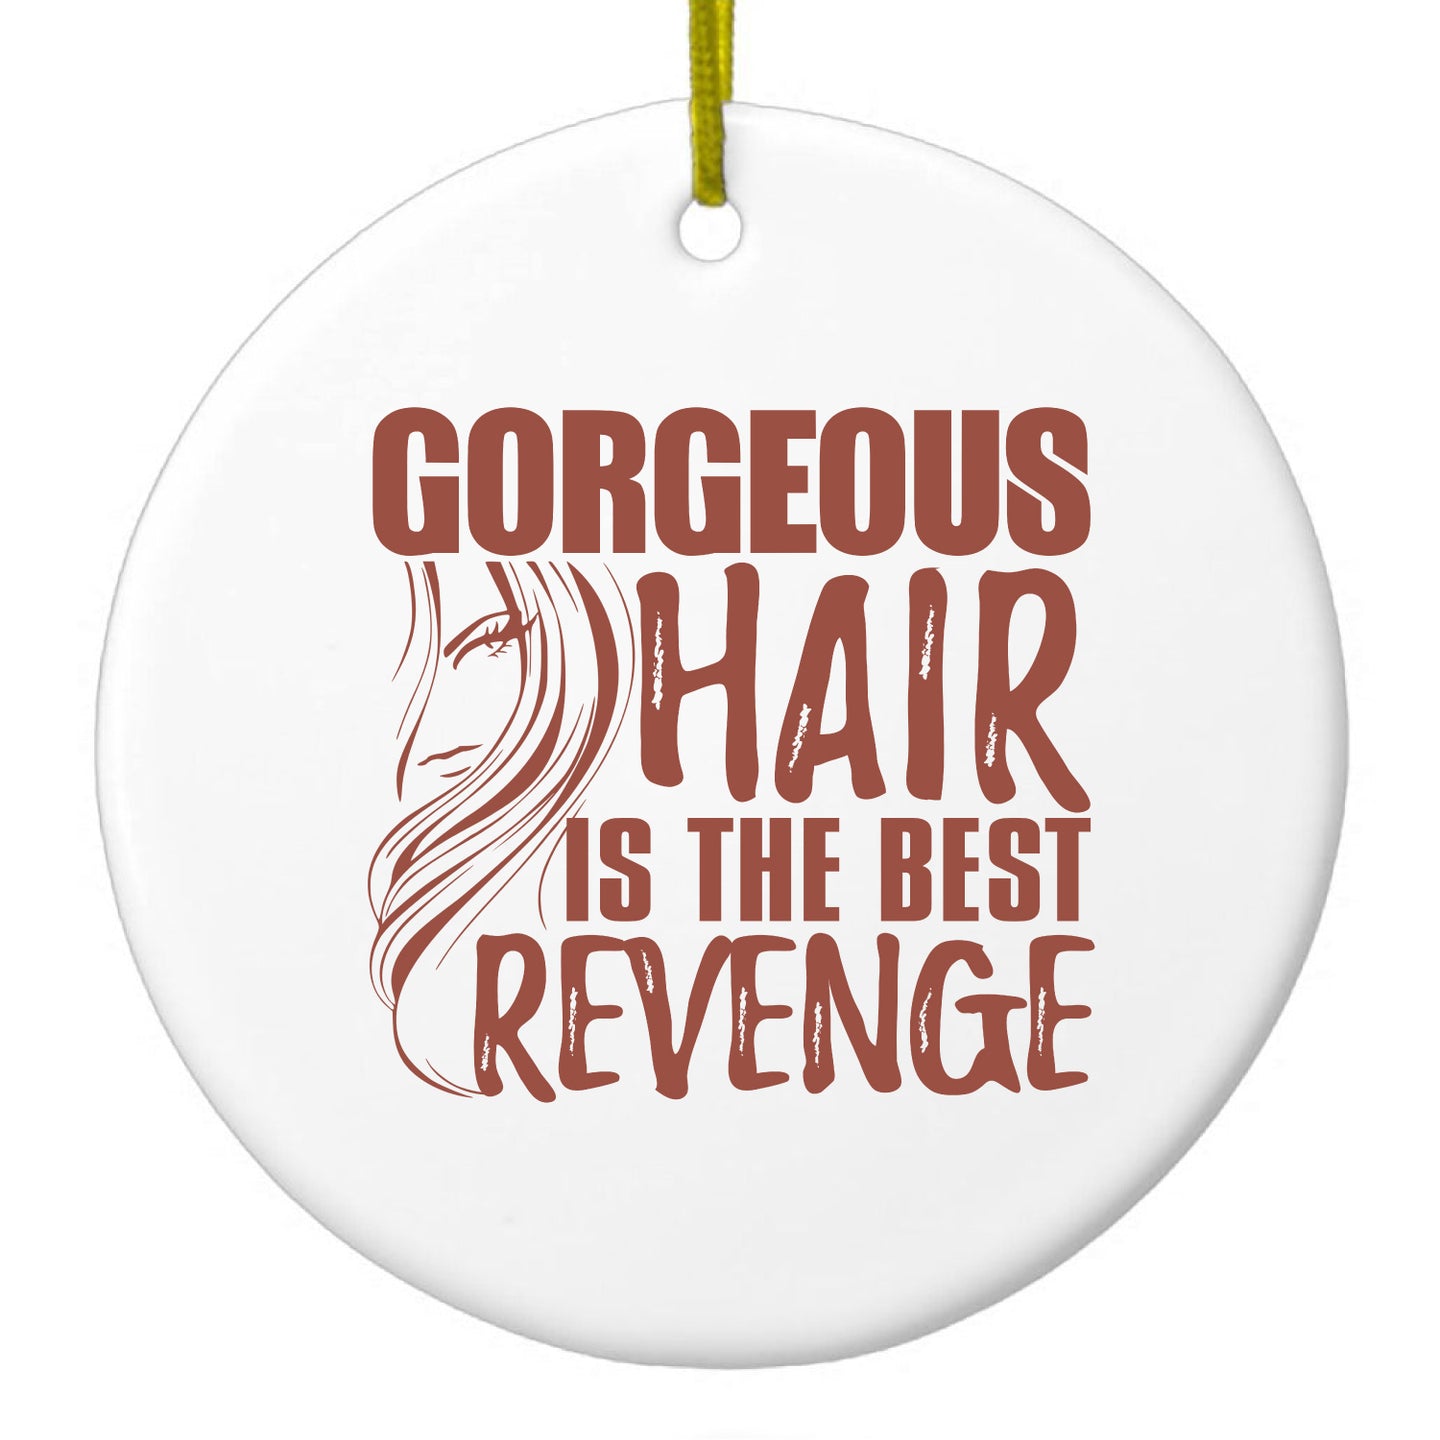 DistinctInk® Hanging Ceramic Christmas Tree Ornament with Gold String - Great Gift / Present - 2 3/4 inch Diameter - Gorgeous Hair is the Best Revenge